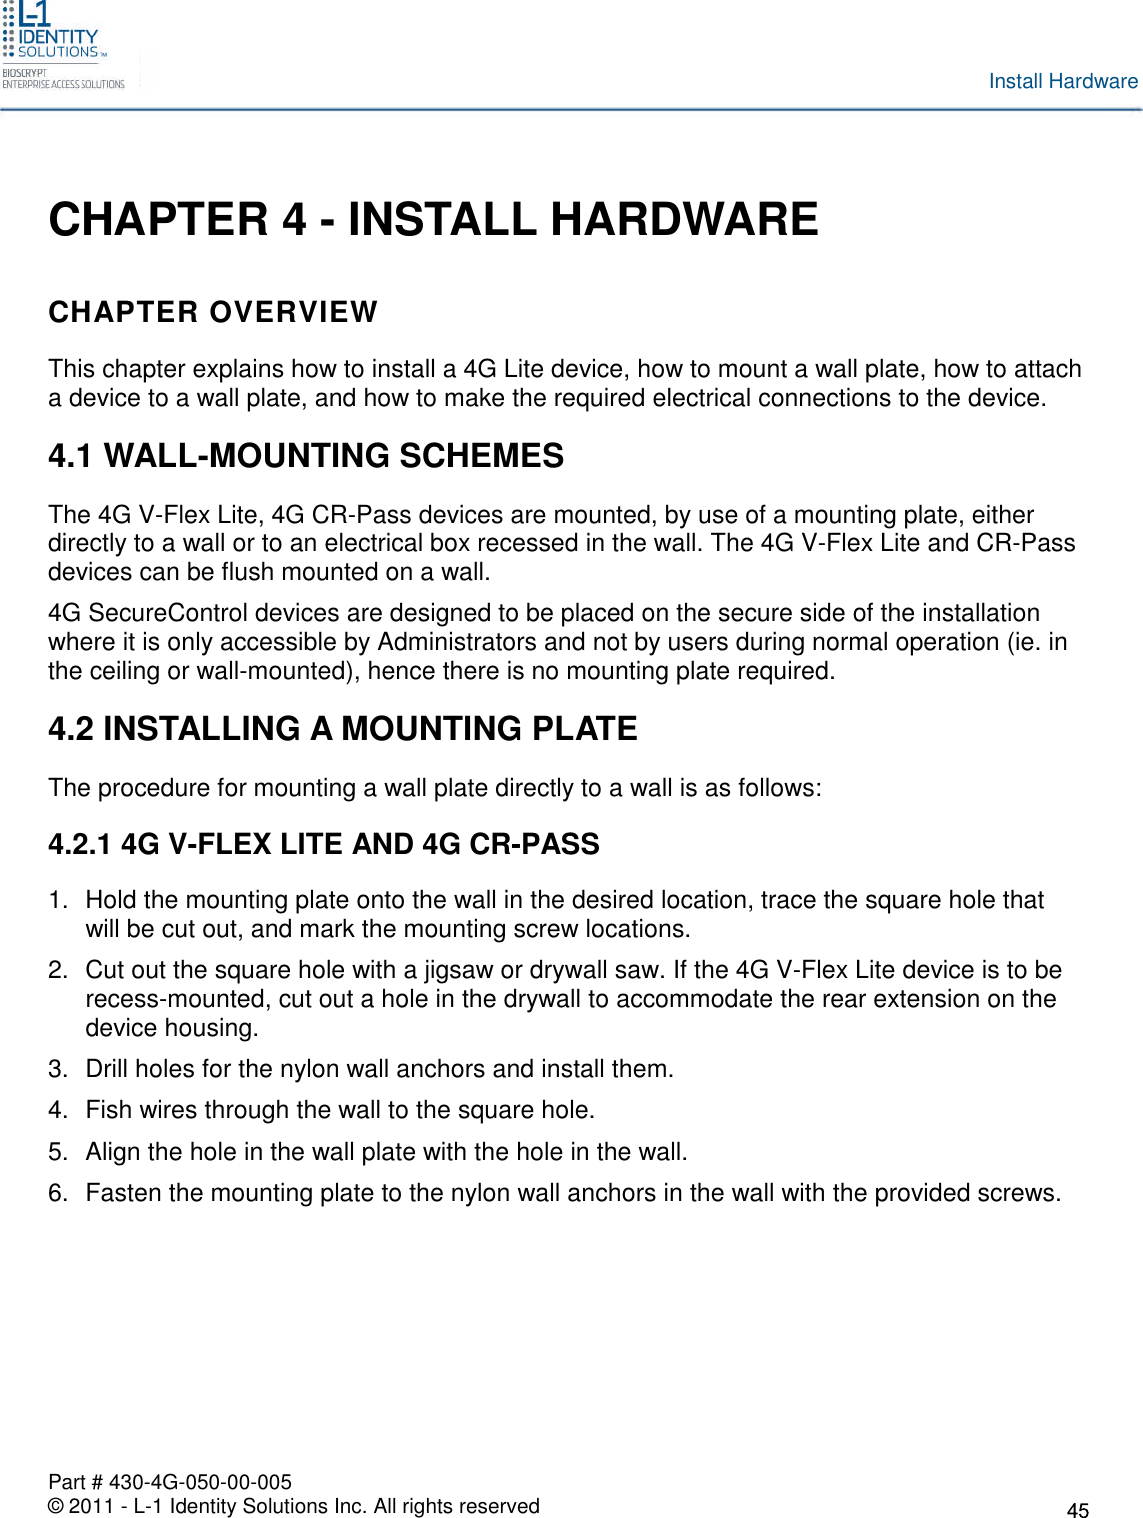 Part # 430-4G-050-00-005© 2011 - L-1 Identity Solutions Inc. All rights reservedInstall HardwareCHAPTER 4 - INSTALL HARDWARECHAPTER OVERVIEWThis chapter explains how to install a 4G Lite device, how to mount a wall plate, how to attacha device to a wall plate, and how to make the required electrical connections to the device.4.1 WALL-MOUNTING SCHEMESThe 4G V-Flex Lite, 4G CR-Pass devices are mounted, by use of a mounting plate, eitherdirectly to a wall or to an electrical box recessed in the wall. The 4G V-Flex Lite and CR-Passdevices can be flush mounted on a wall.4G SecureControl devices are designed to be placed on the secure side of the installationwhere it is only accessible by Administrators and not by users during normal operation (ie. inthe ceiling or wall-mounted), hence there is no mounting plate required.4.2 INSTALLING A MOUNTING PLATEThe procedure for mounting a wall plate directly to a wall is as follows:4.2.1 4G V-FLEX LITE AND 4G CR-PASS1. Hold the mounting plate onto the wall in the desired location, trace the square hole thatwill be cut out, and mark the mounting screw locations.2. Cut out the square hole with a jigsaw or drywall saw. If the 4G V-Flex Lite device is to berecess-mounted, cut out a hole in the drywall to accommodate the rear extension on thedevice housing.3. Drill holes for the nylon wall anchors and install them.4. Fish wires through the wall to the square hole.5. Align the hole in the wall plate with the hole in the wall.6. Fasten the mounting plate to the nylon wall anchors in the wall with the provided screws.